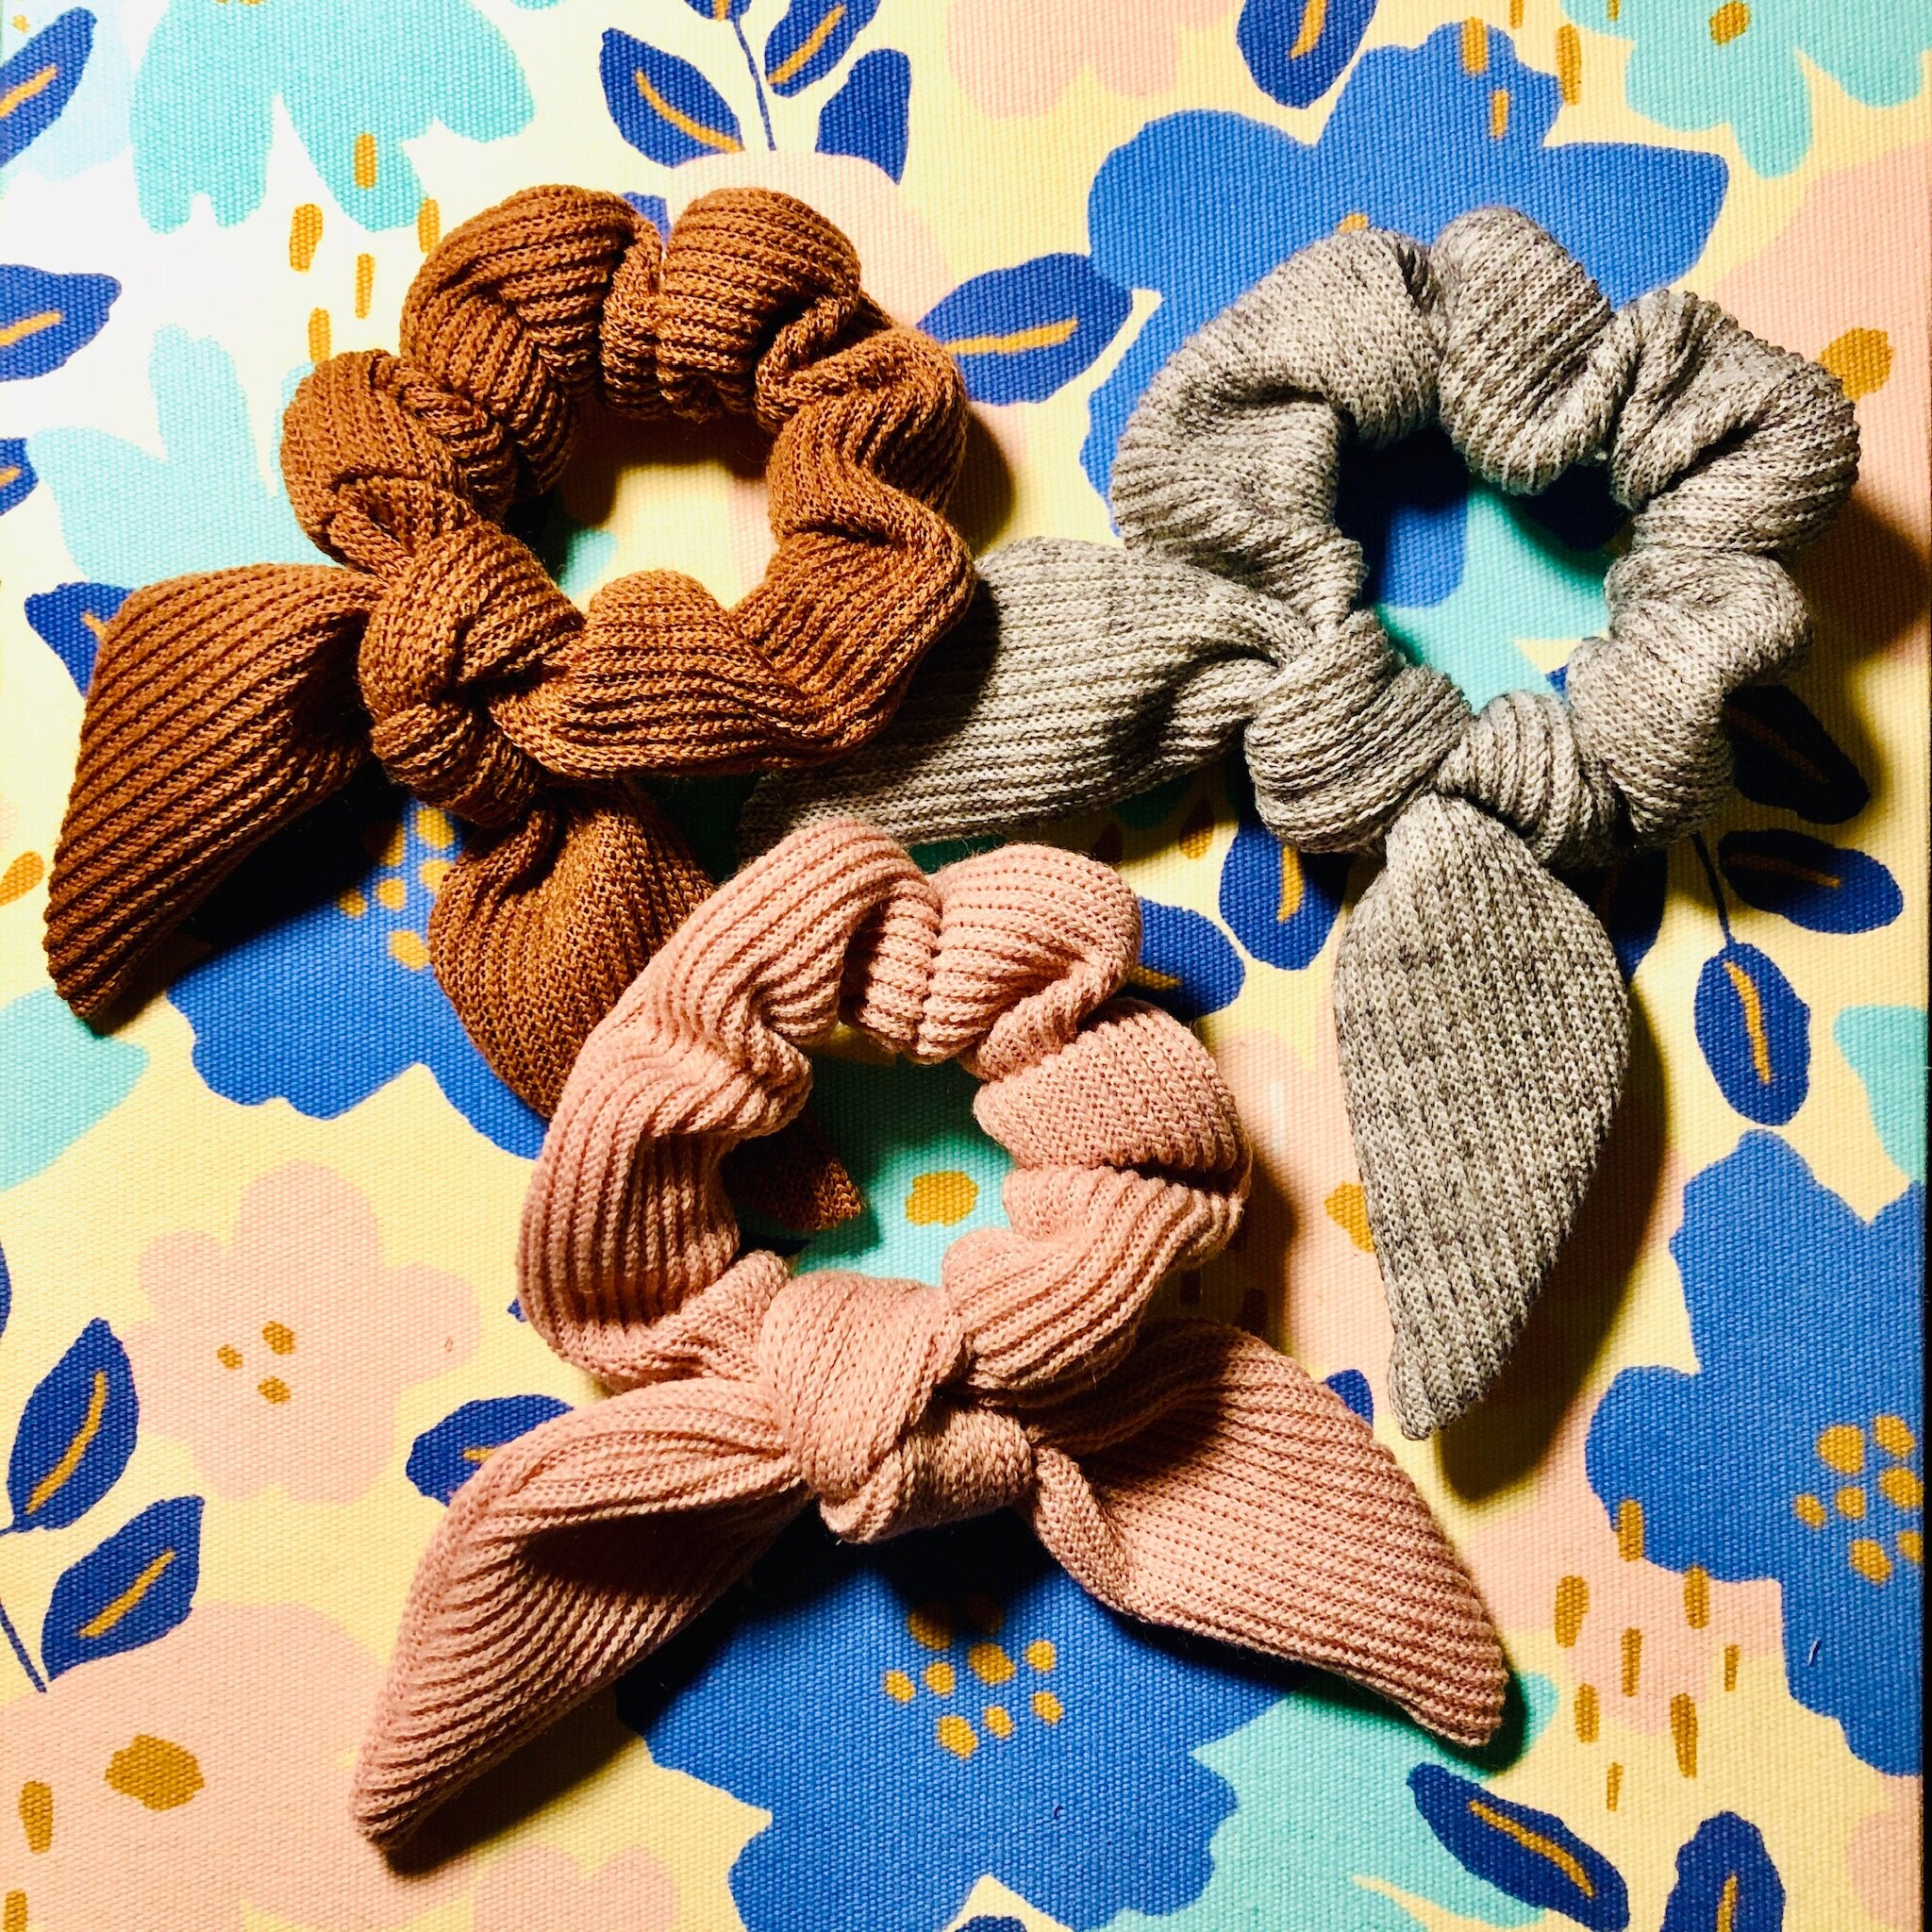 90s fashion trends you can shop consciously / recycled scrunchies